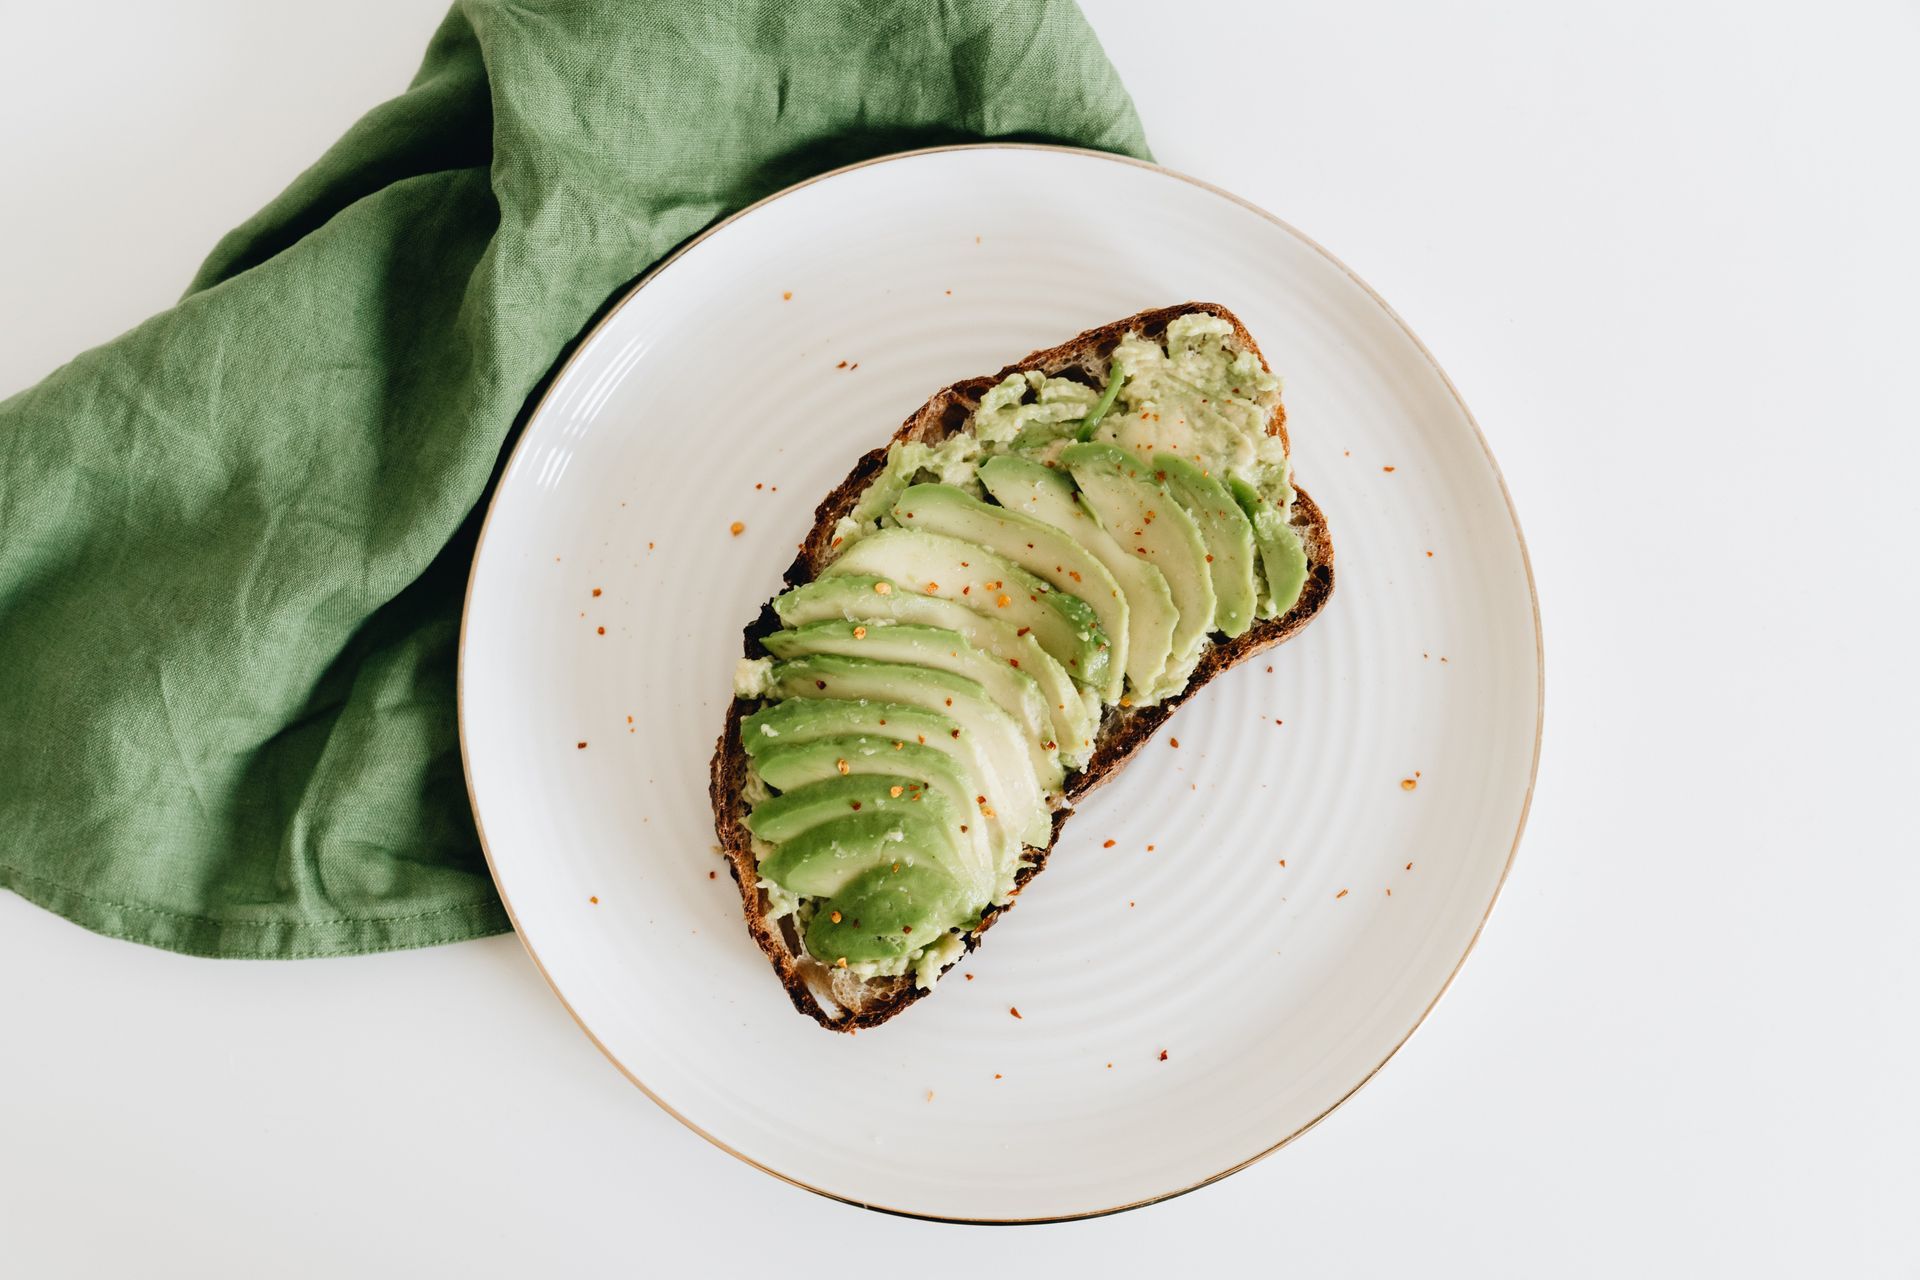 Avocado on toast is a great high energy meal